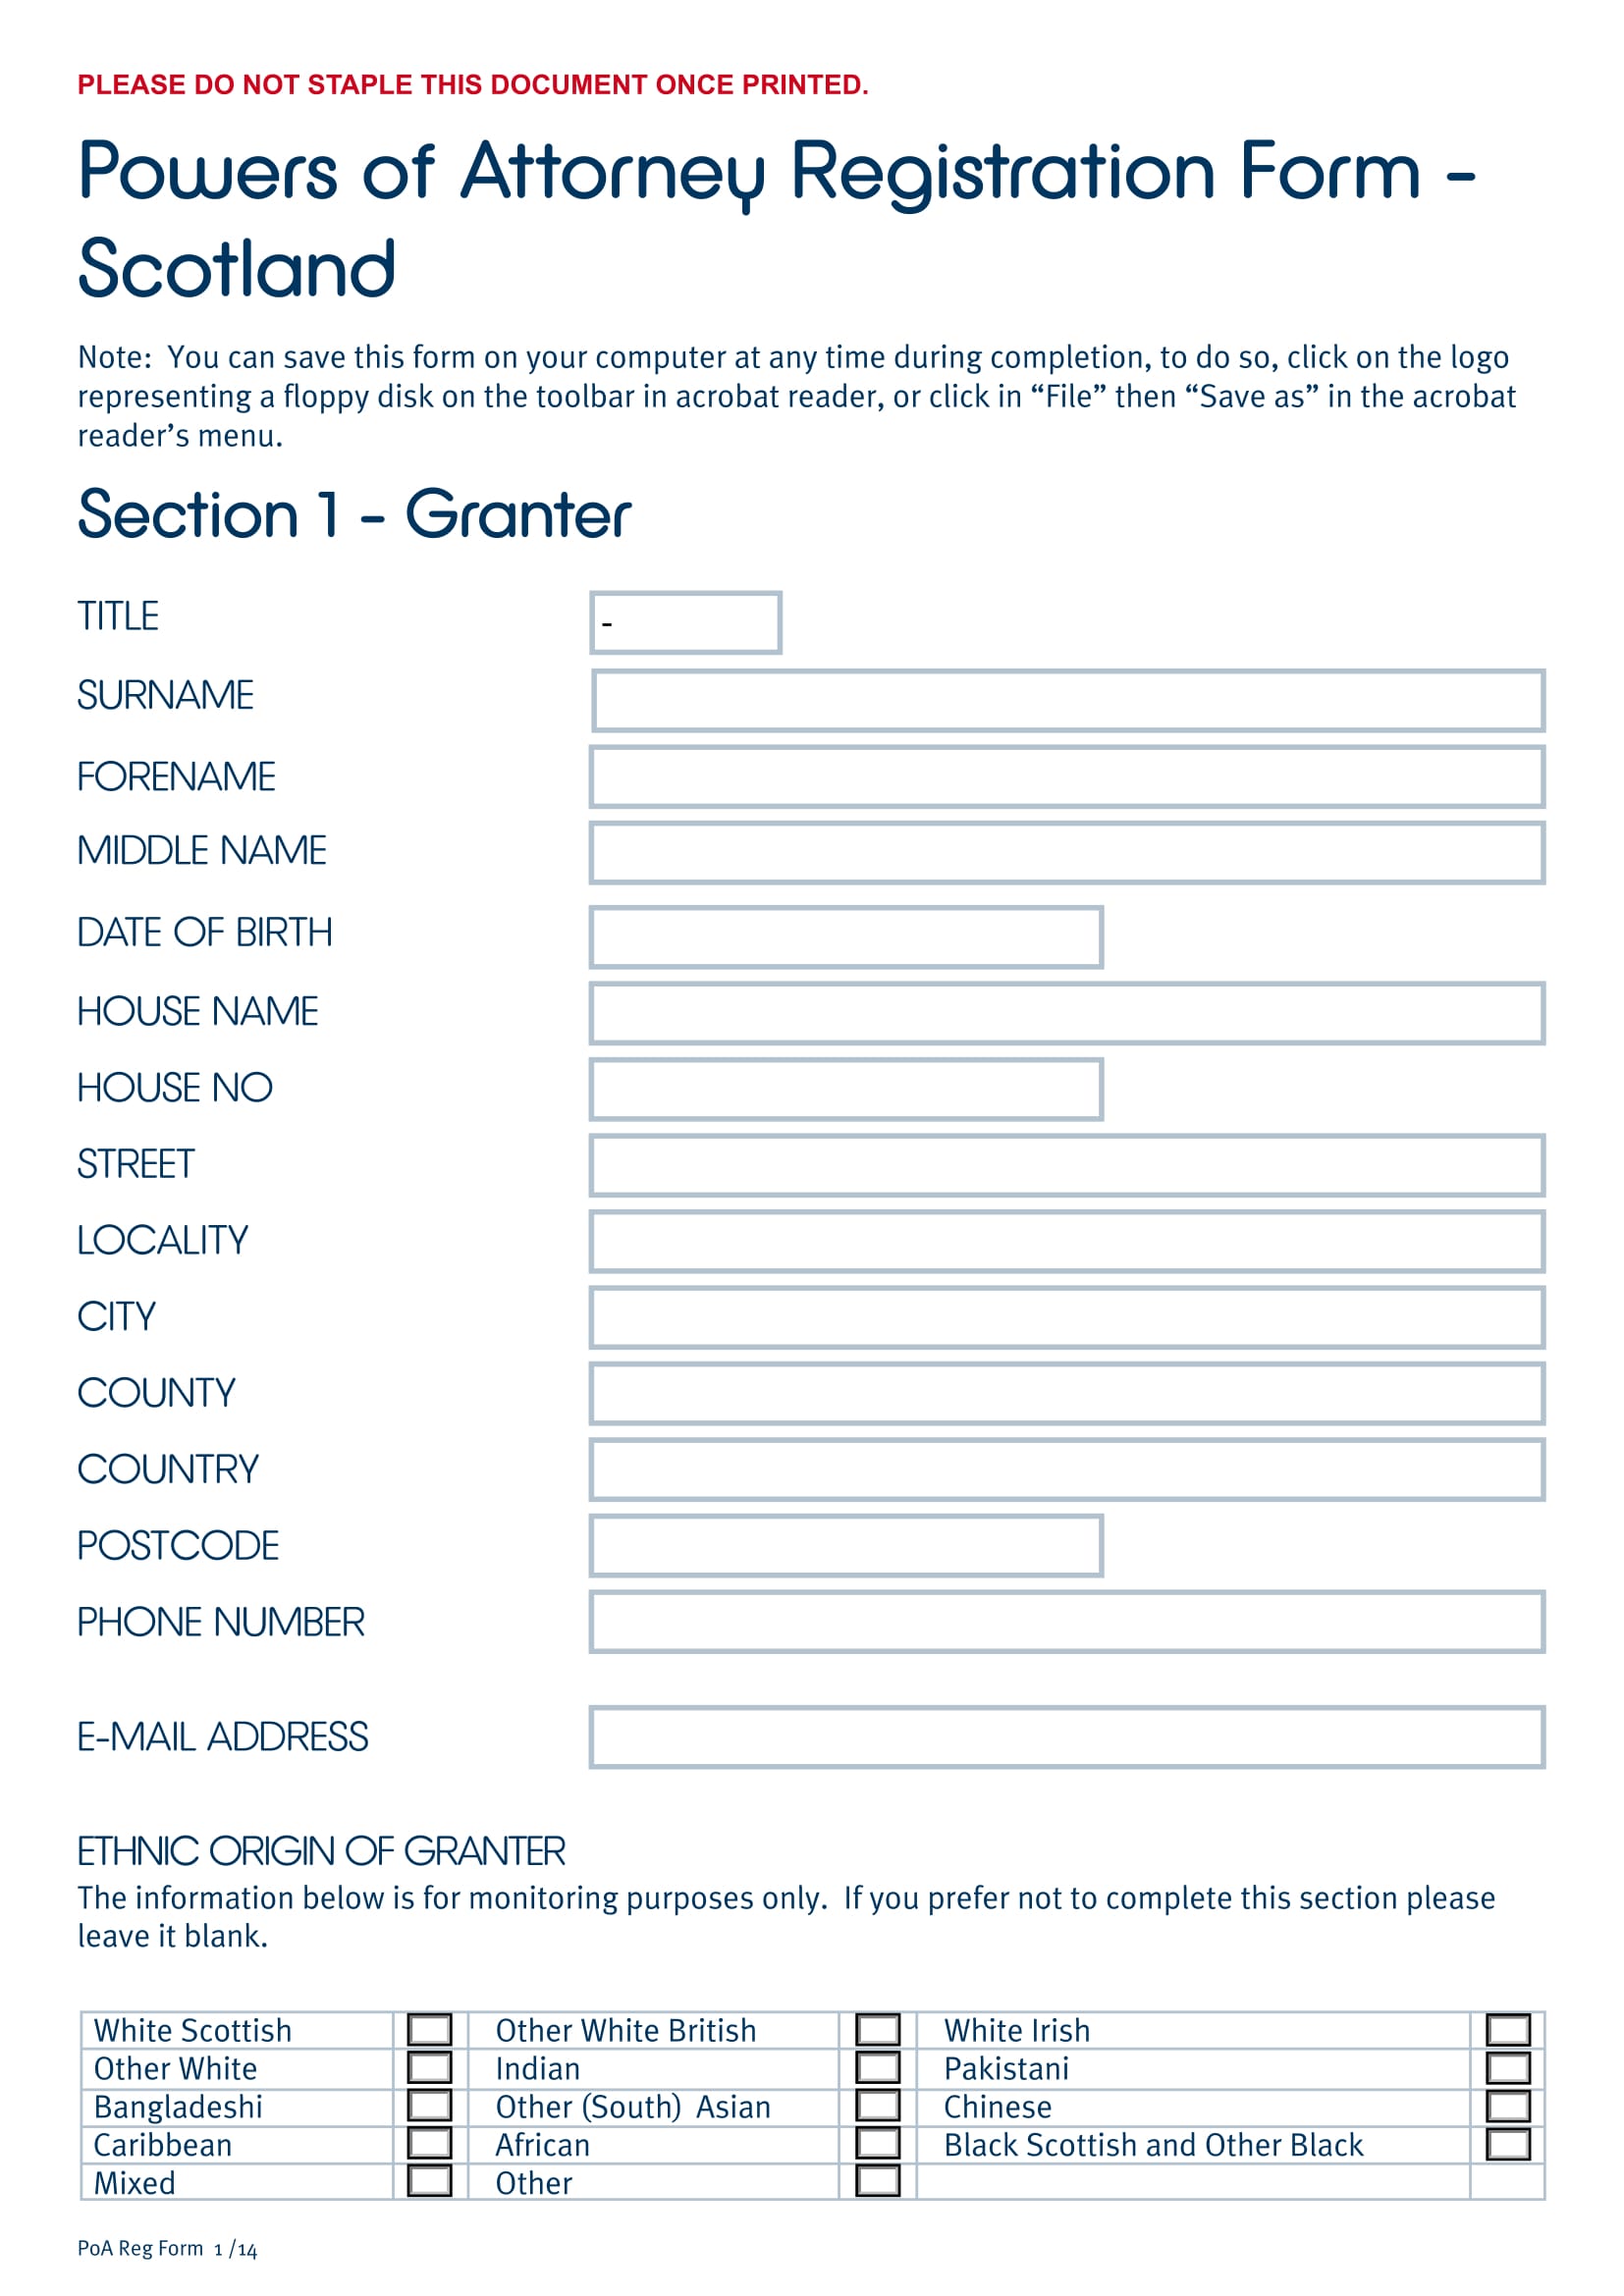 powers of attorney registration form 01